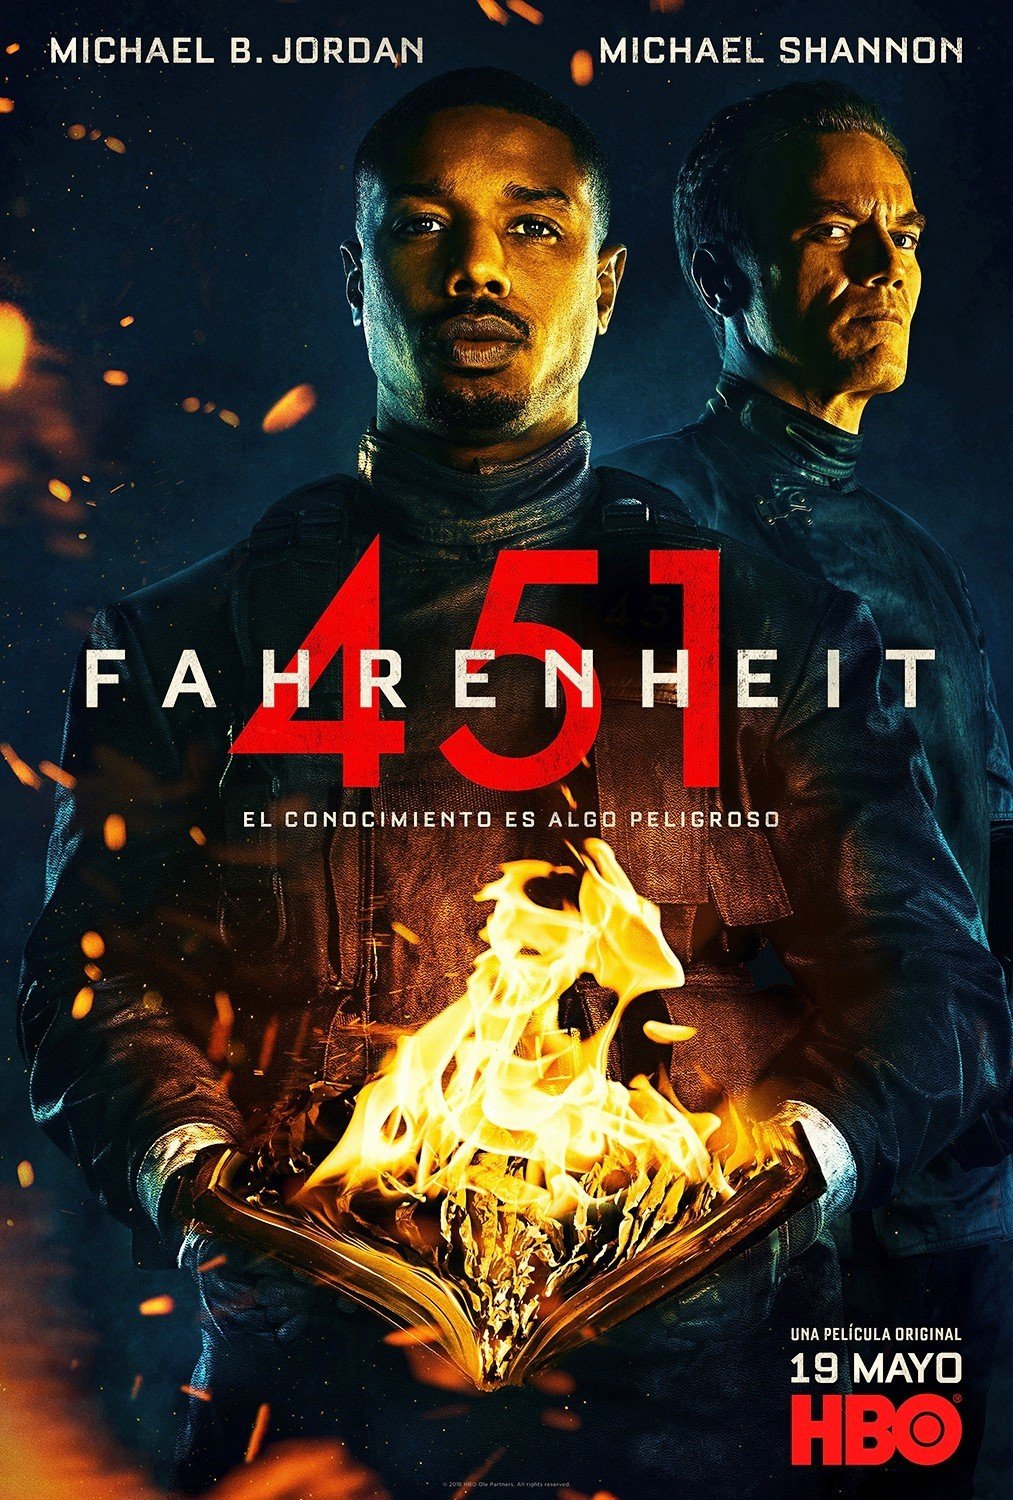 Poster of HBO's Fahrenheit 451 (2018)